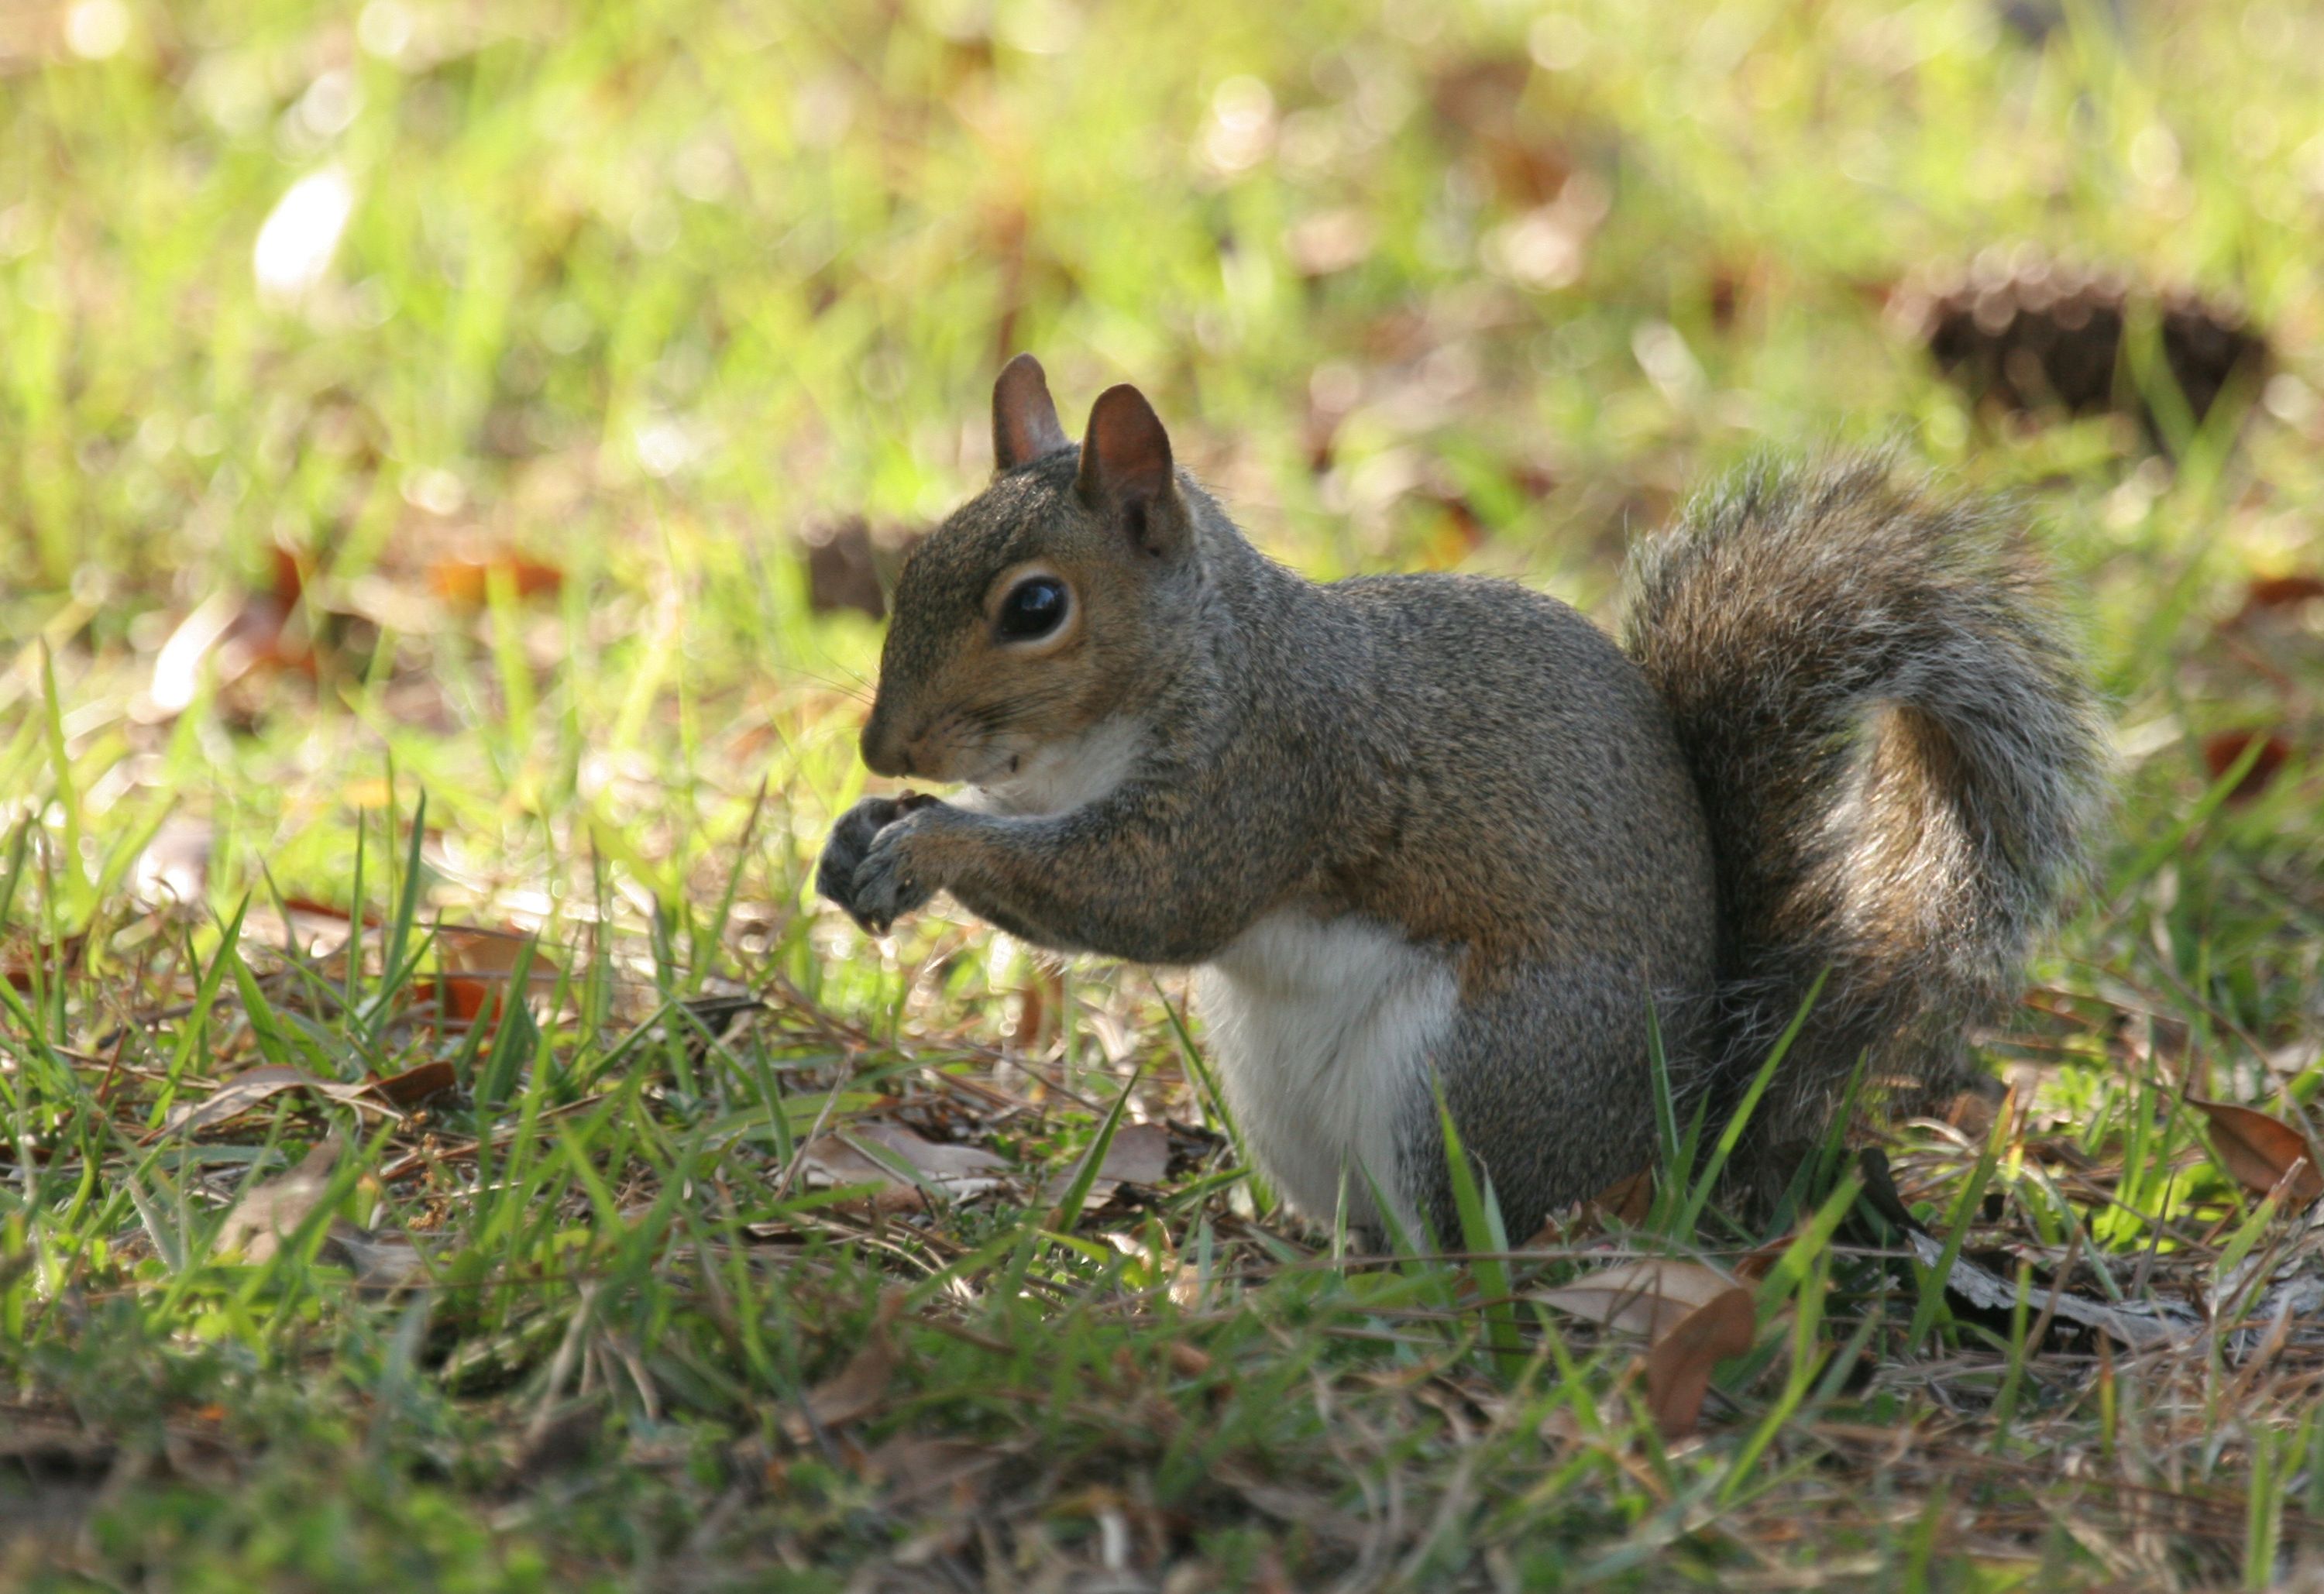 Squirrels are very cute when they are outside. However, they can do a lot of damage if they make it indoors. Preventing these and other rodents from entering structures is an important component of IPM. 